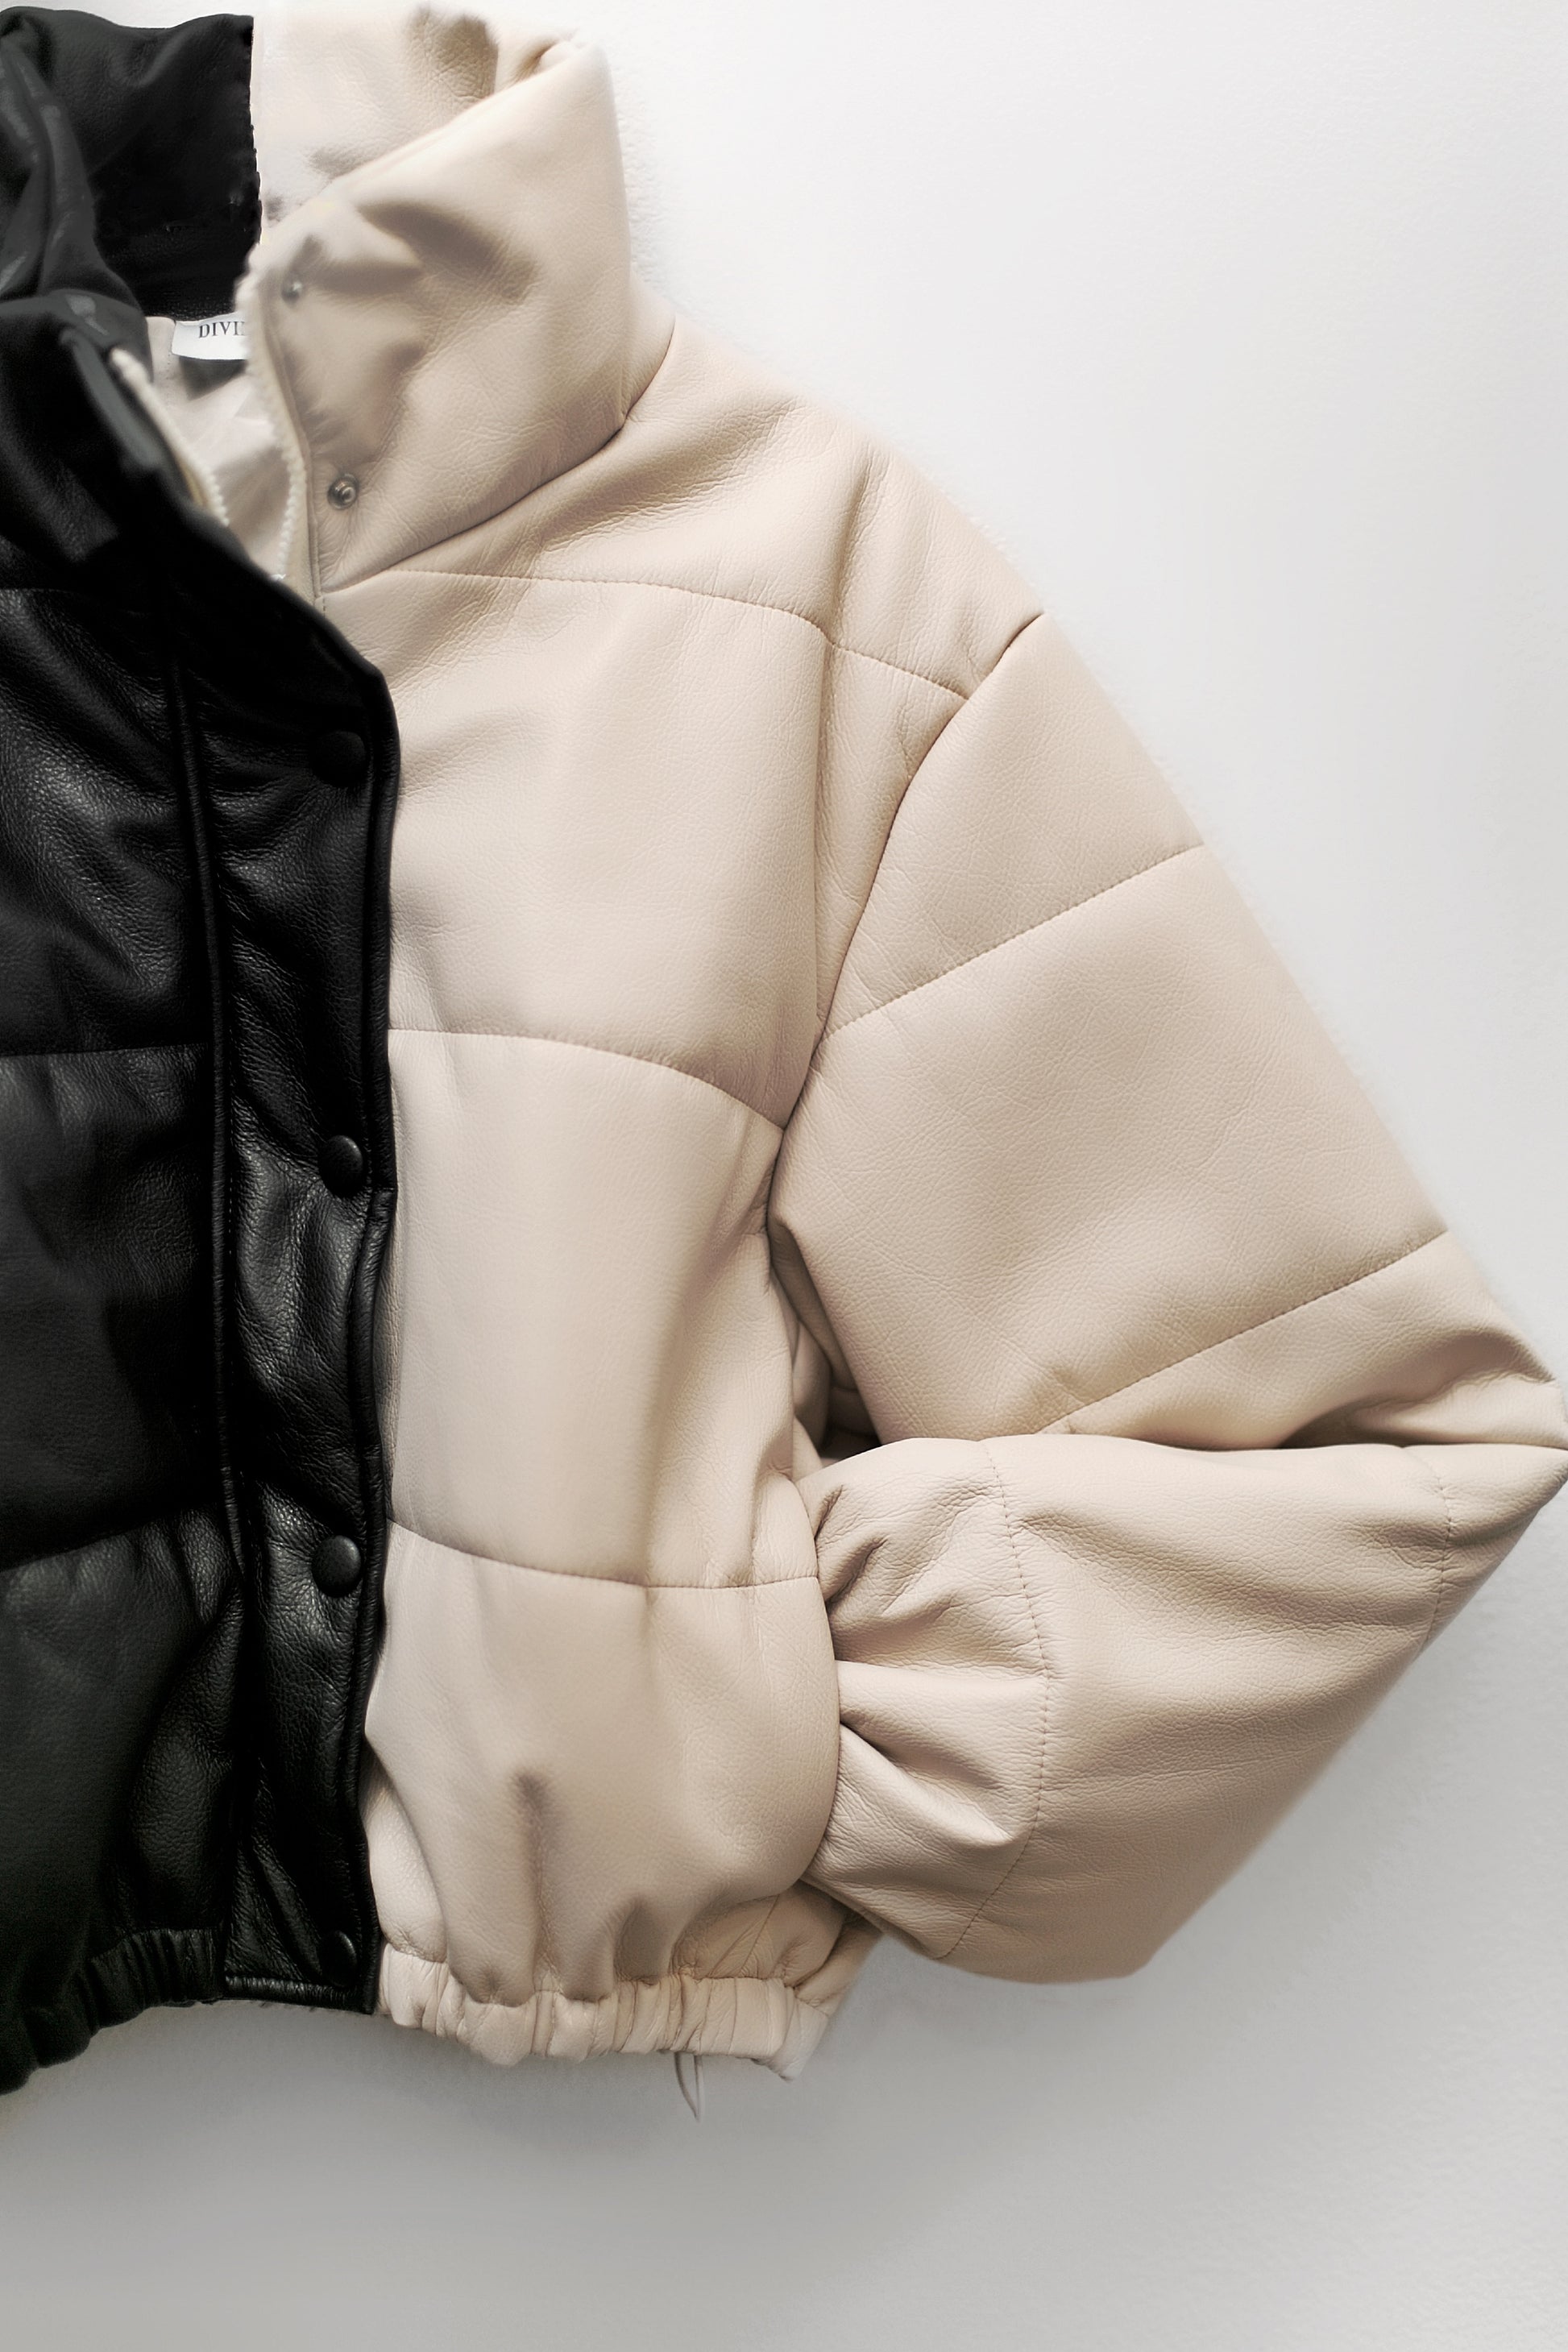 RAYLIN CROPPED PUFFER JACKET - BISQUE – Ecco Clothes